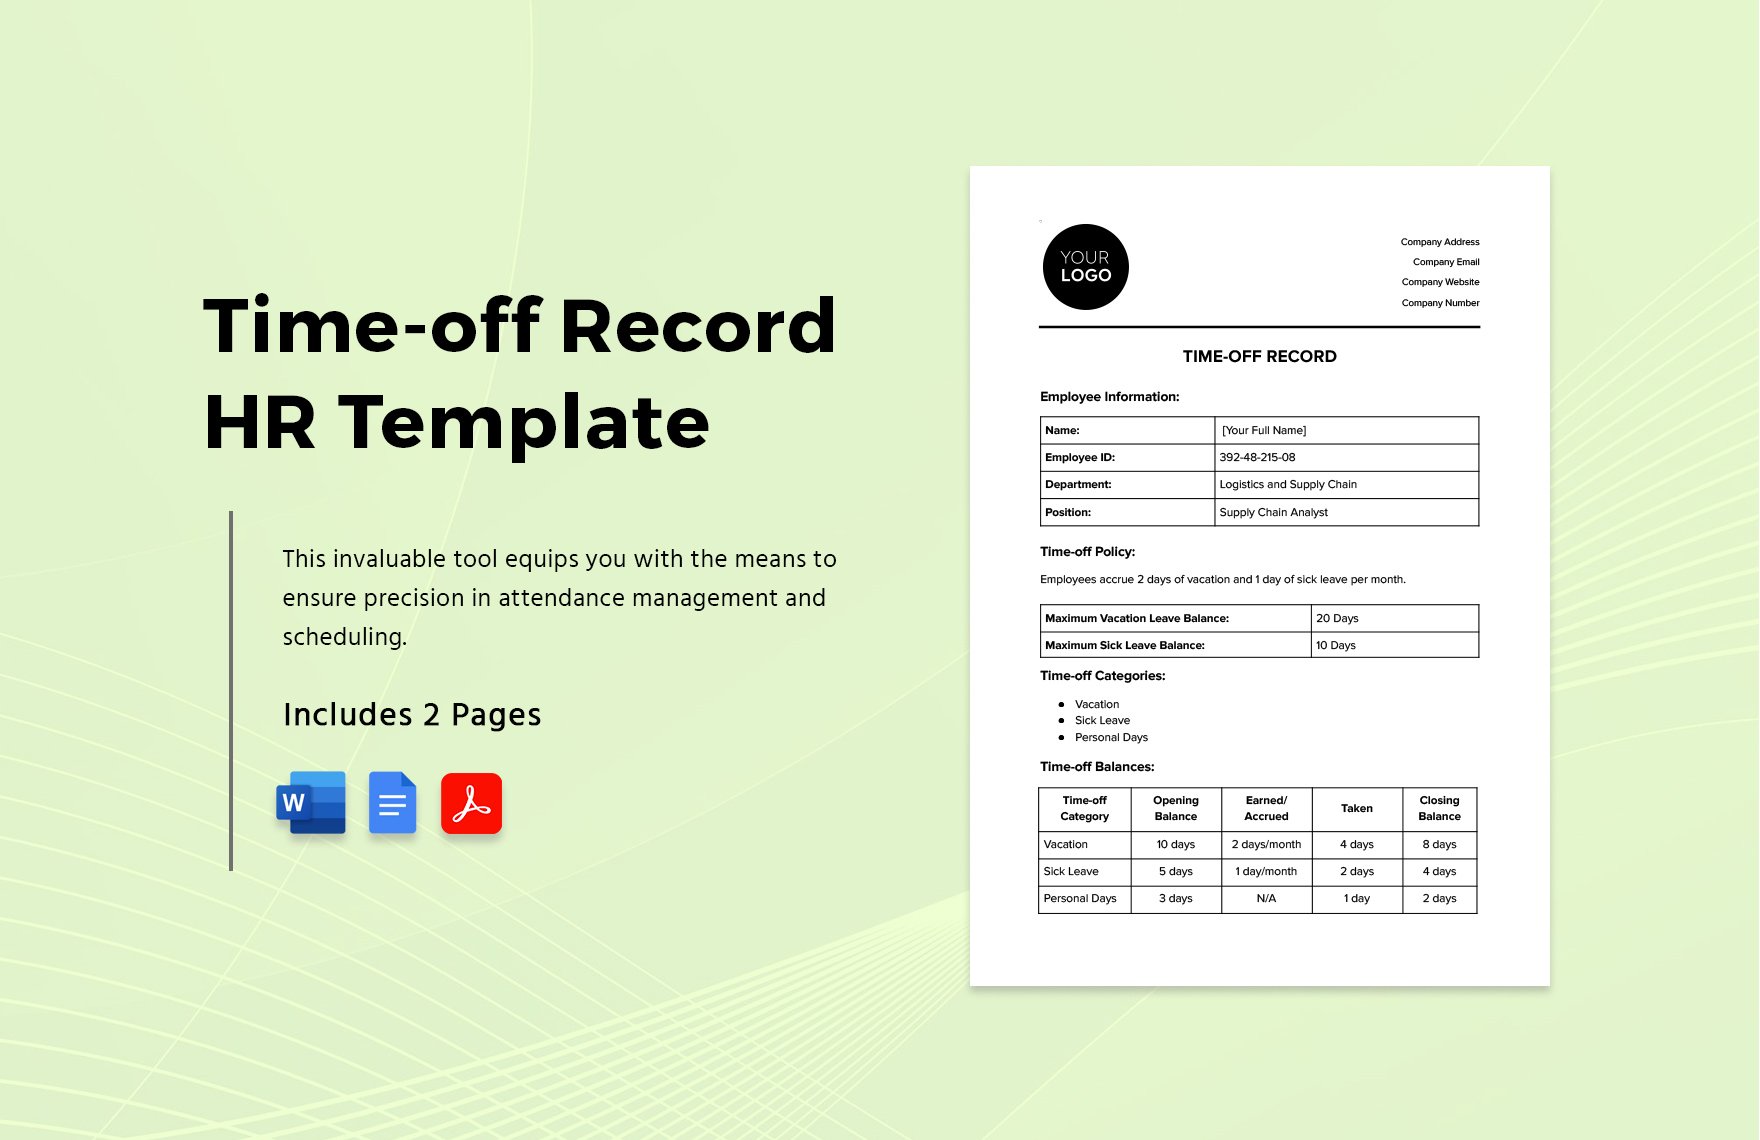 Time-off Record HR Template